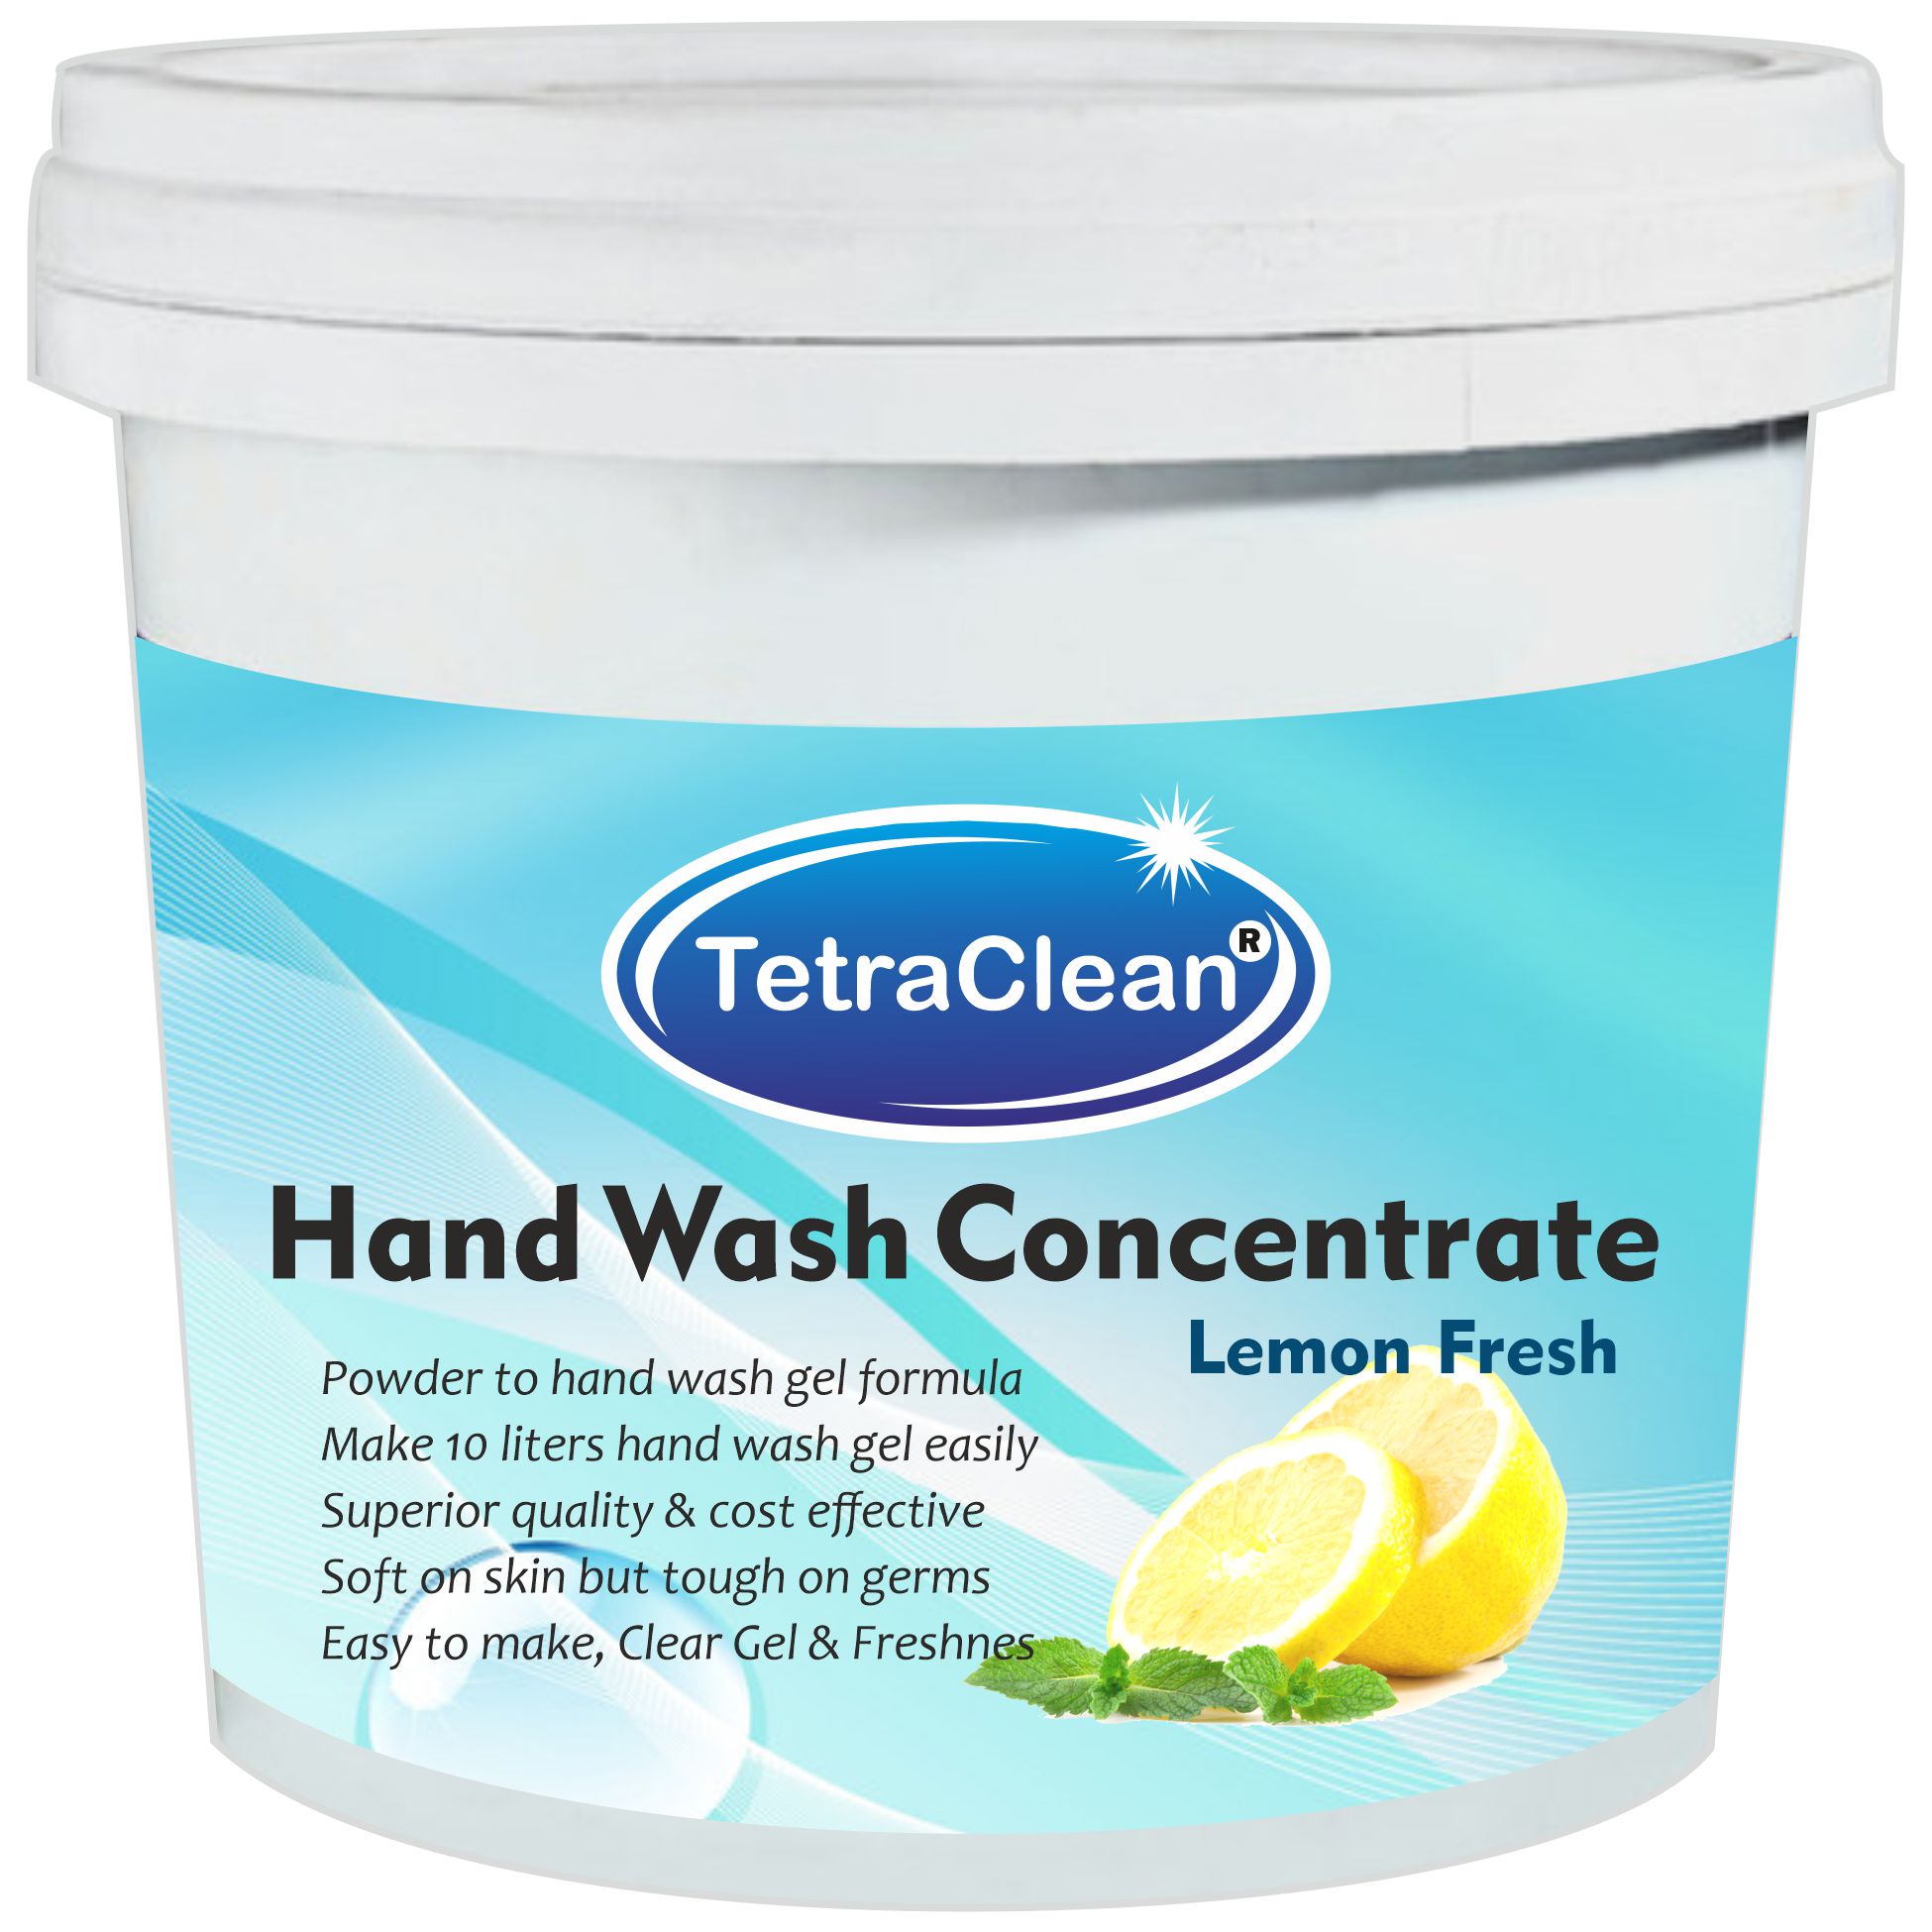 TetraClean Hand Wash Concentrate Powder - 500gm packing - with lemon fragrance